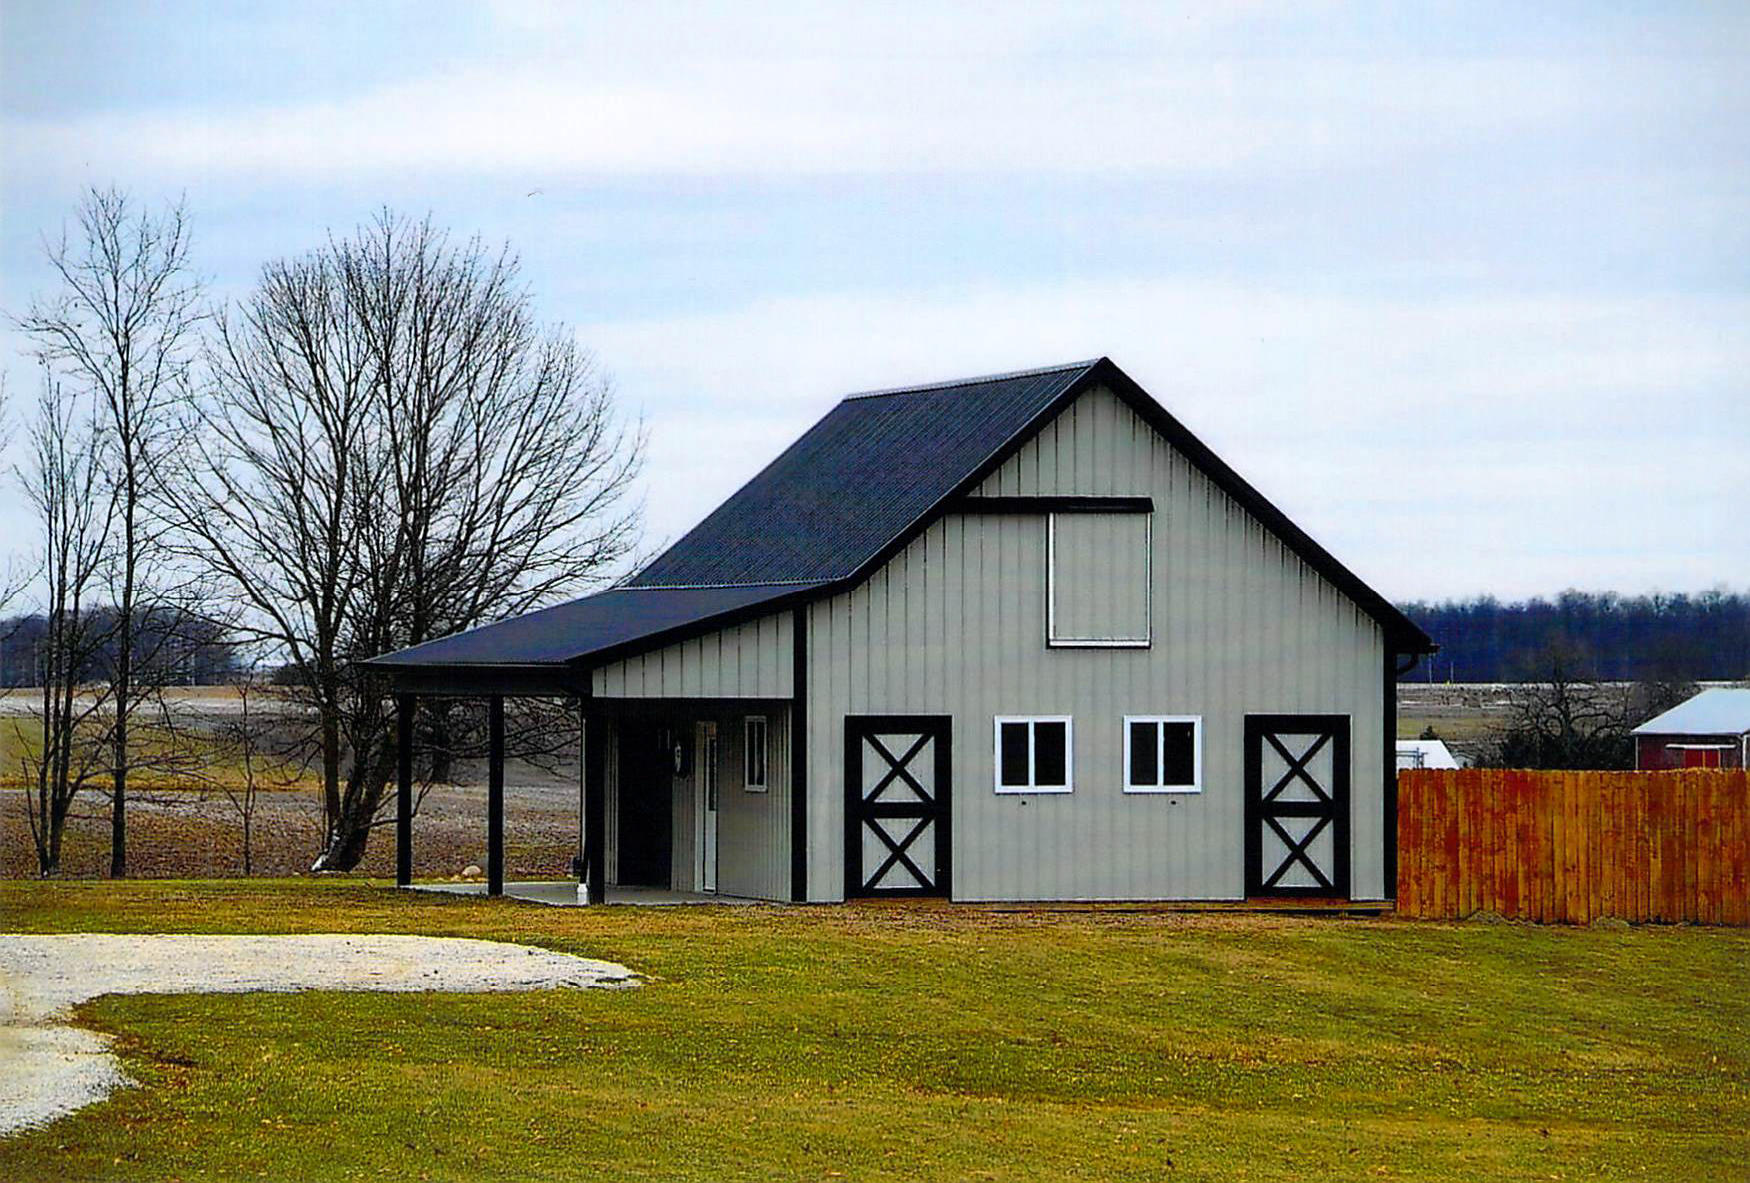 When looking for an experienced carpenter, J&M Carpentry constructs custom garages, pole barns, and other structures that are built to last.
We take pride in offering our clients generations of Amish craftsmanship, together with modern and professional site management. We build our structures to suit all our customers’ own unique styles and needs. In addition to pole barns and garages, we also build horse barns, arenas, stables, and also specialize in re-roofing.
Whether you are in the market for residential or commercial buildings, or metal roofing or traditional shingle roofing, our professional team will complete your job on time and on budget. Quality work. Immeasurable experience. Competitive Pricing. That is our equation for success!